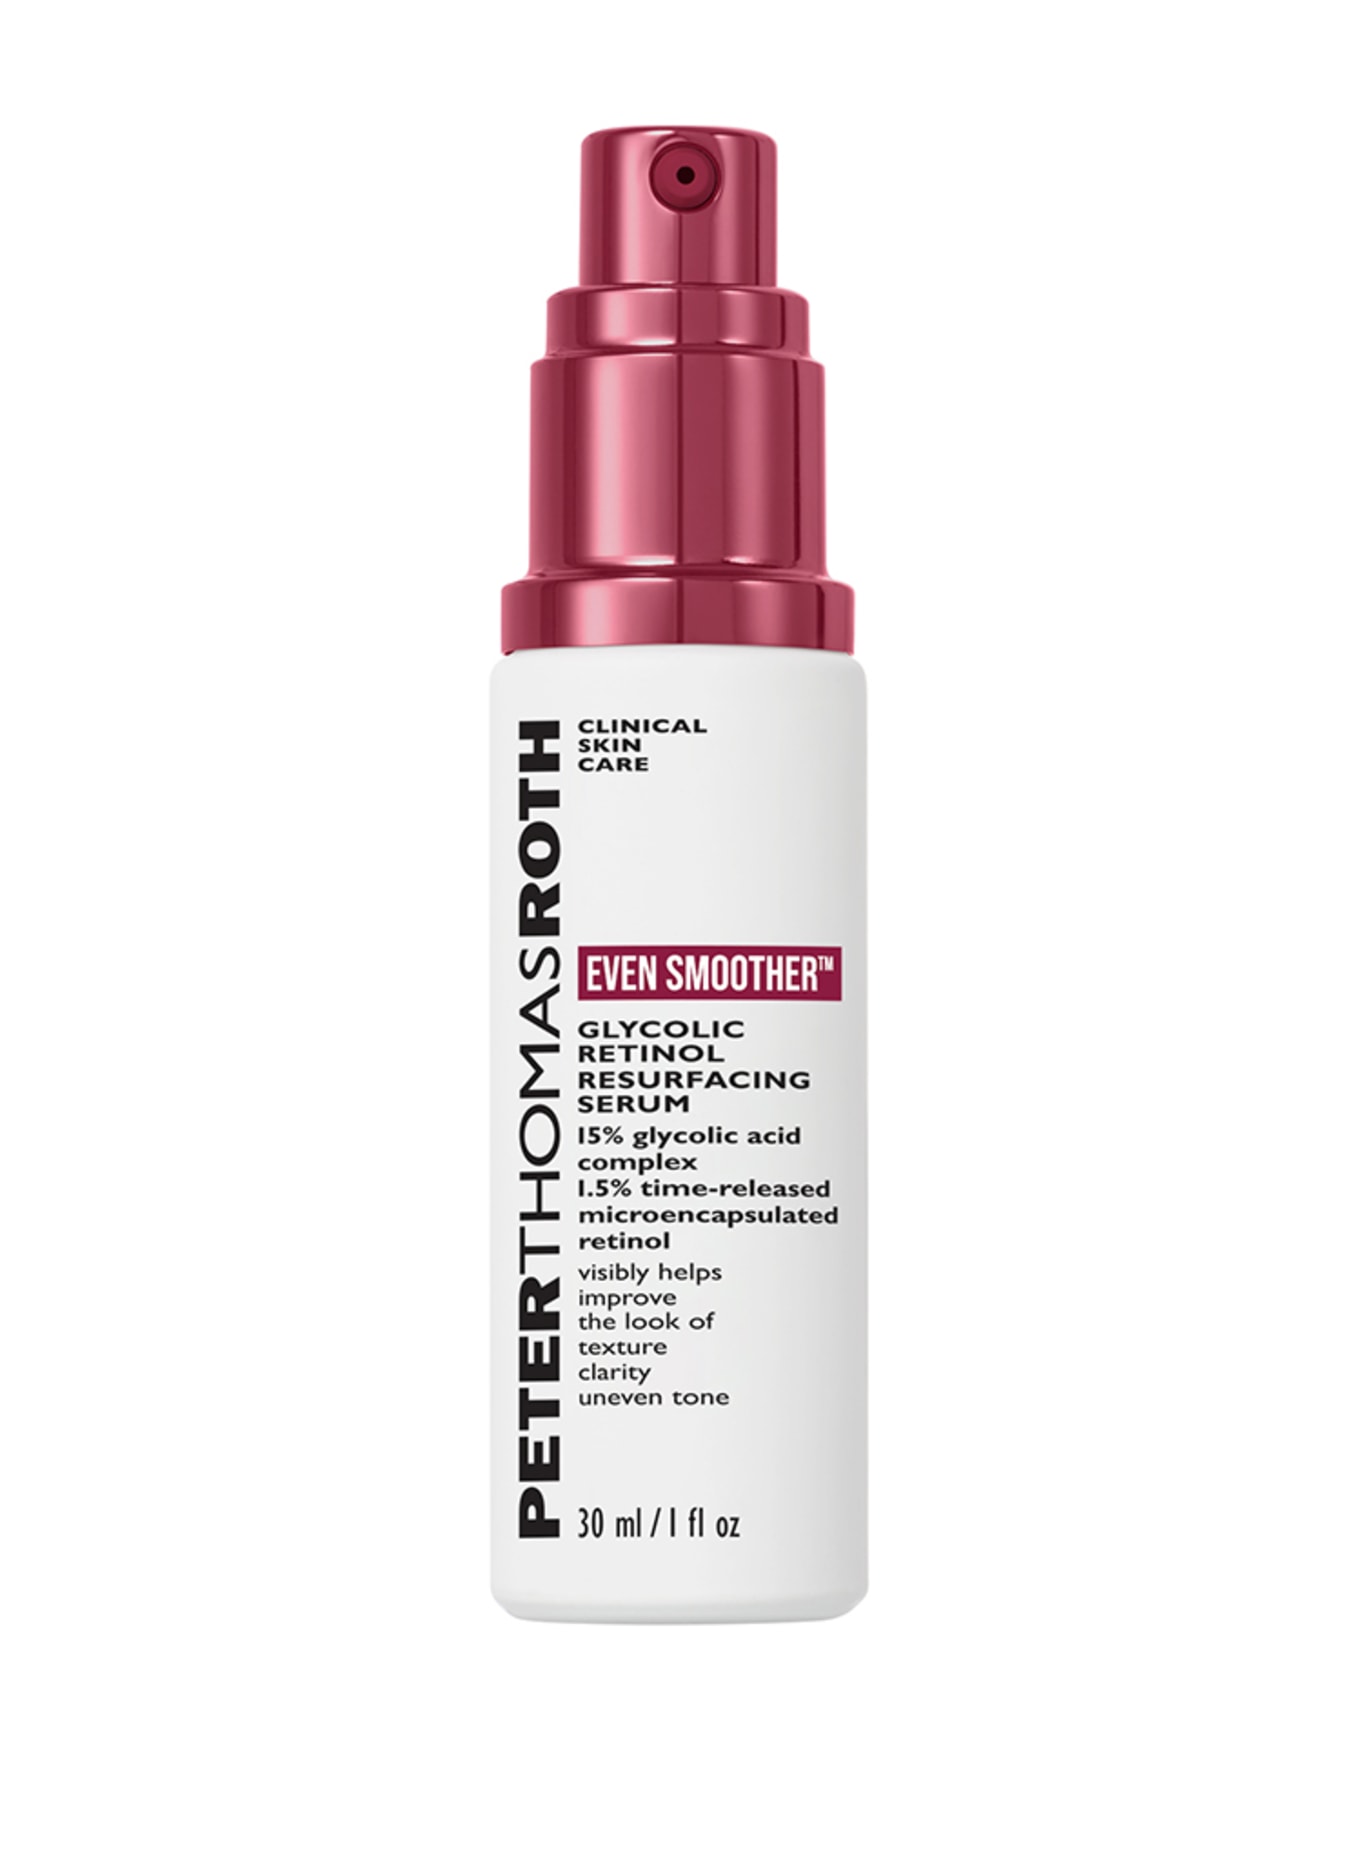 PETER THOMAS ROTH EVEN SMOOTHER™ (Obrázek 2)